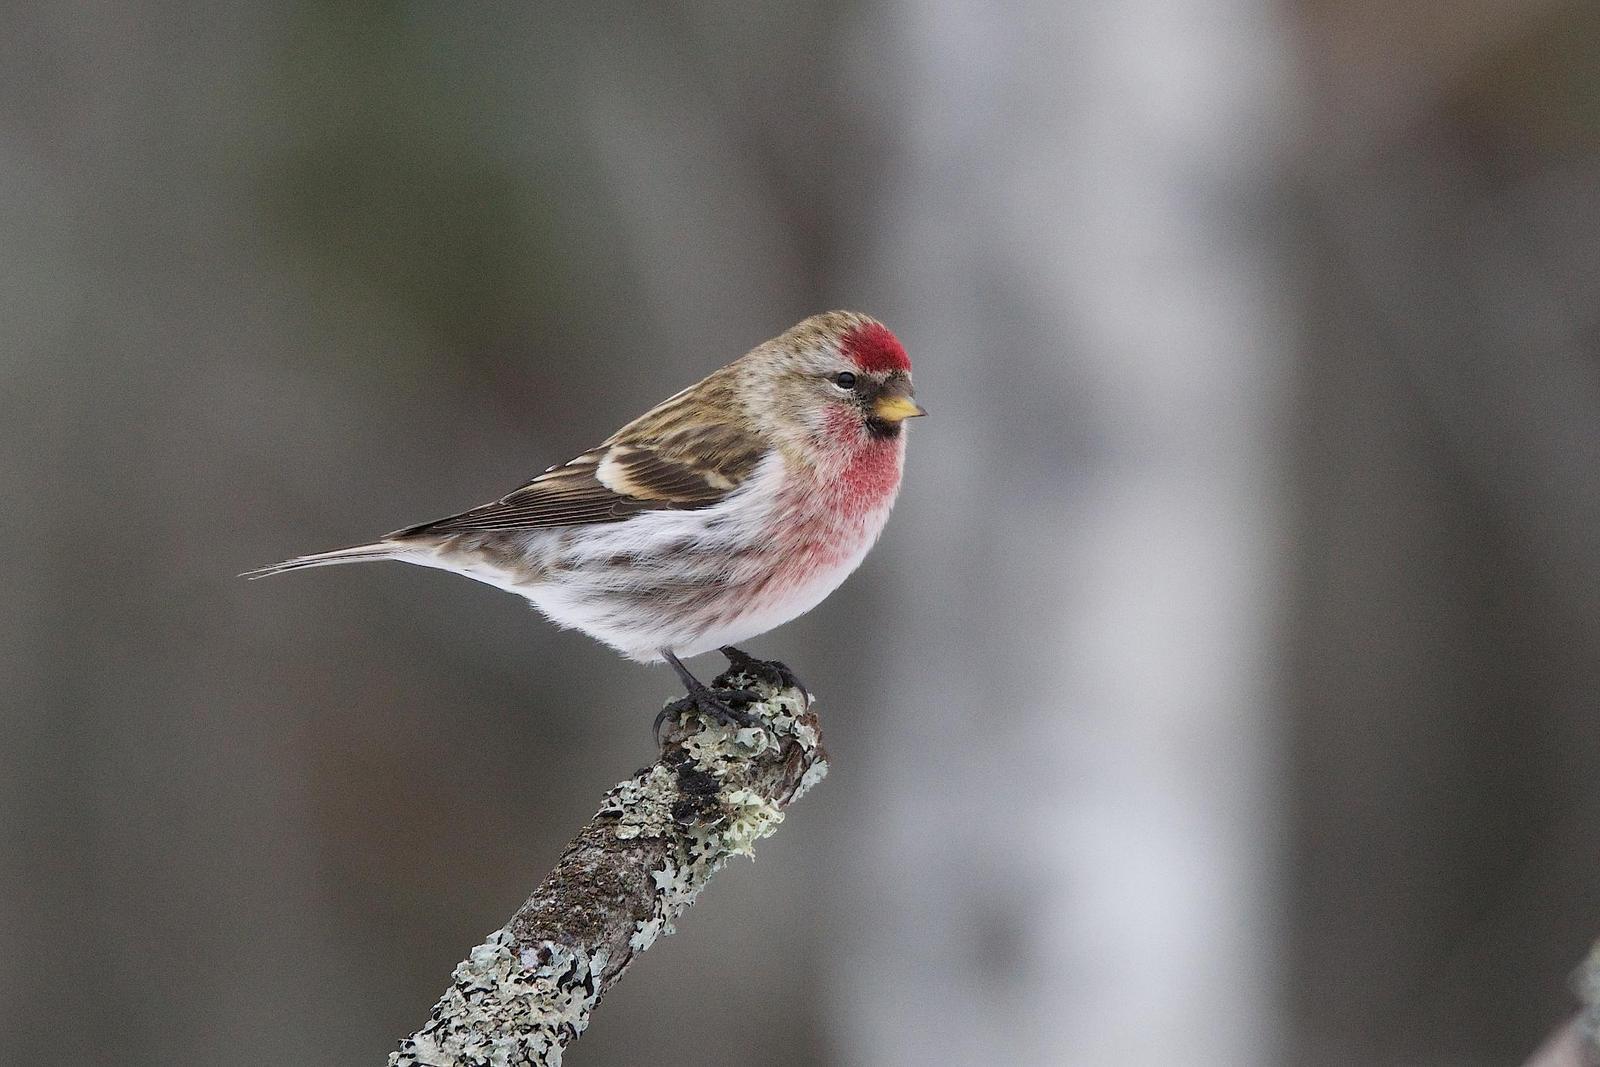 Common Redpoll Photo by Gerald Hoekstra